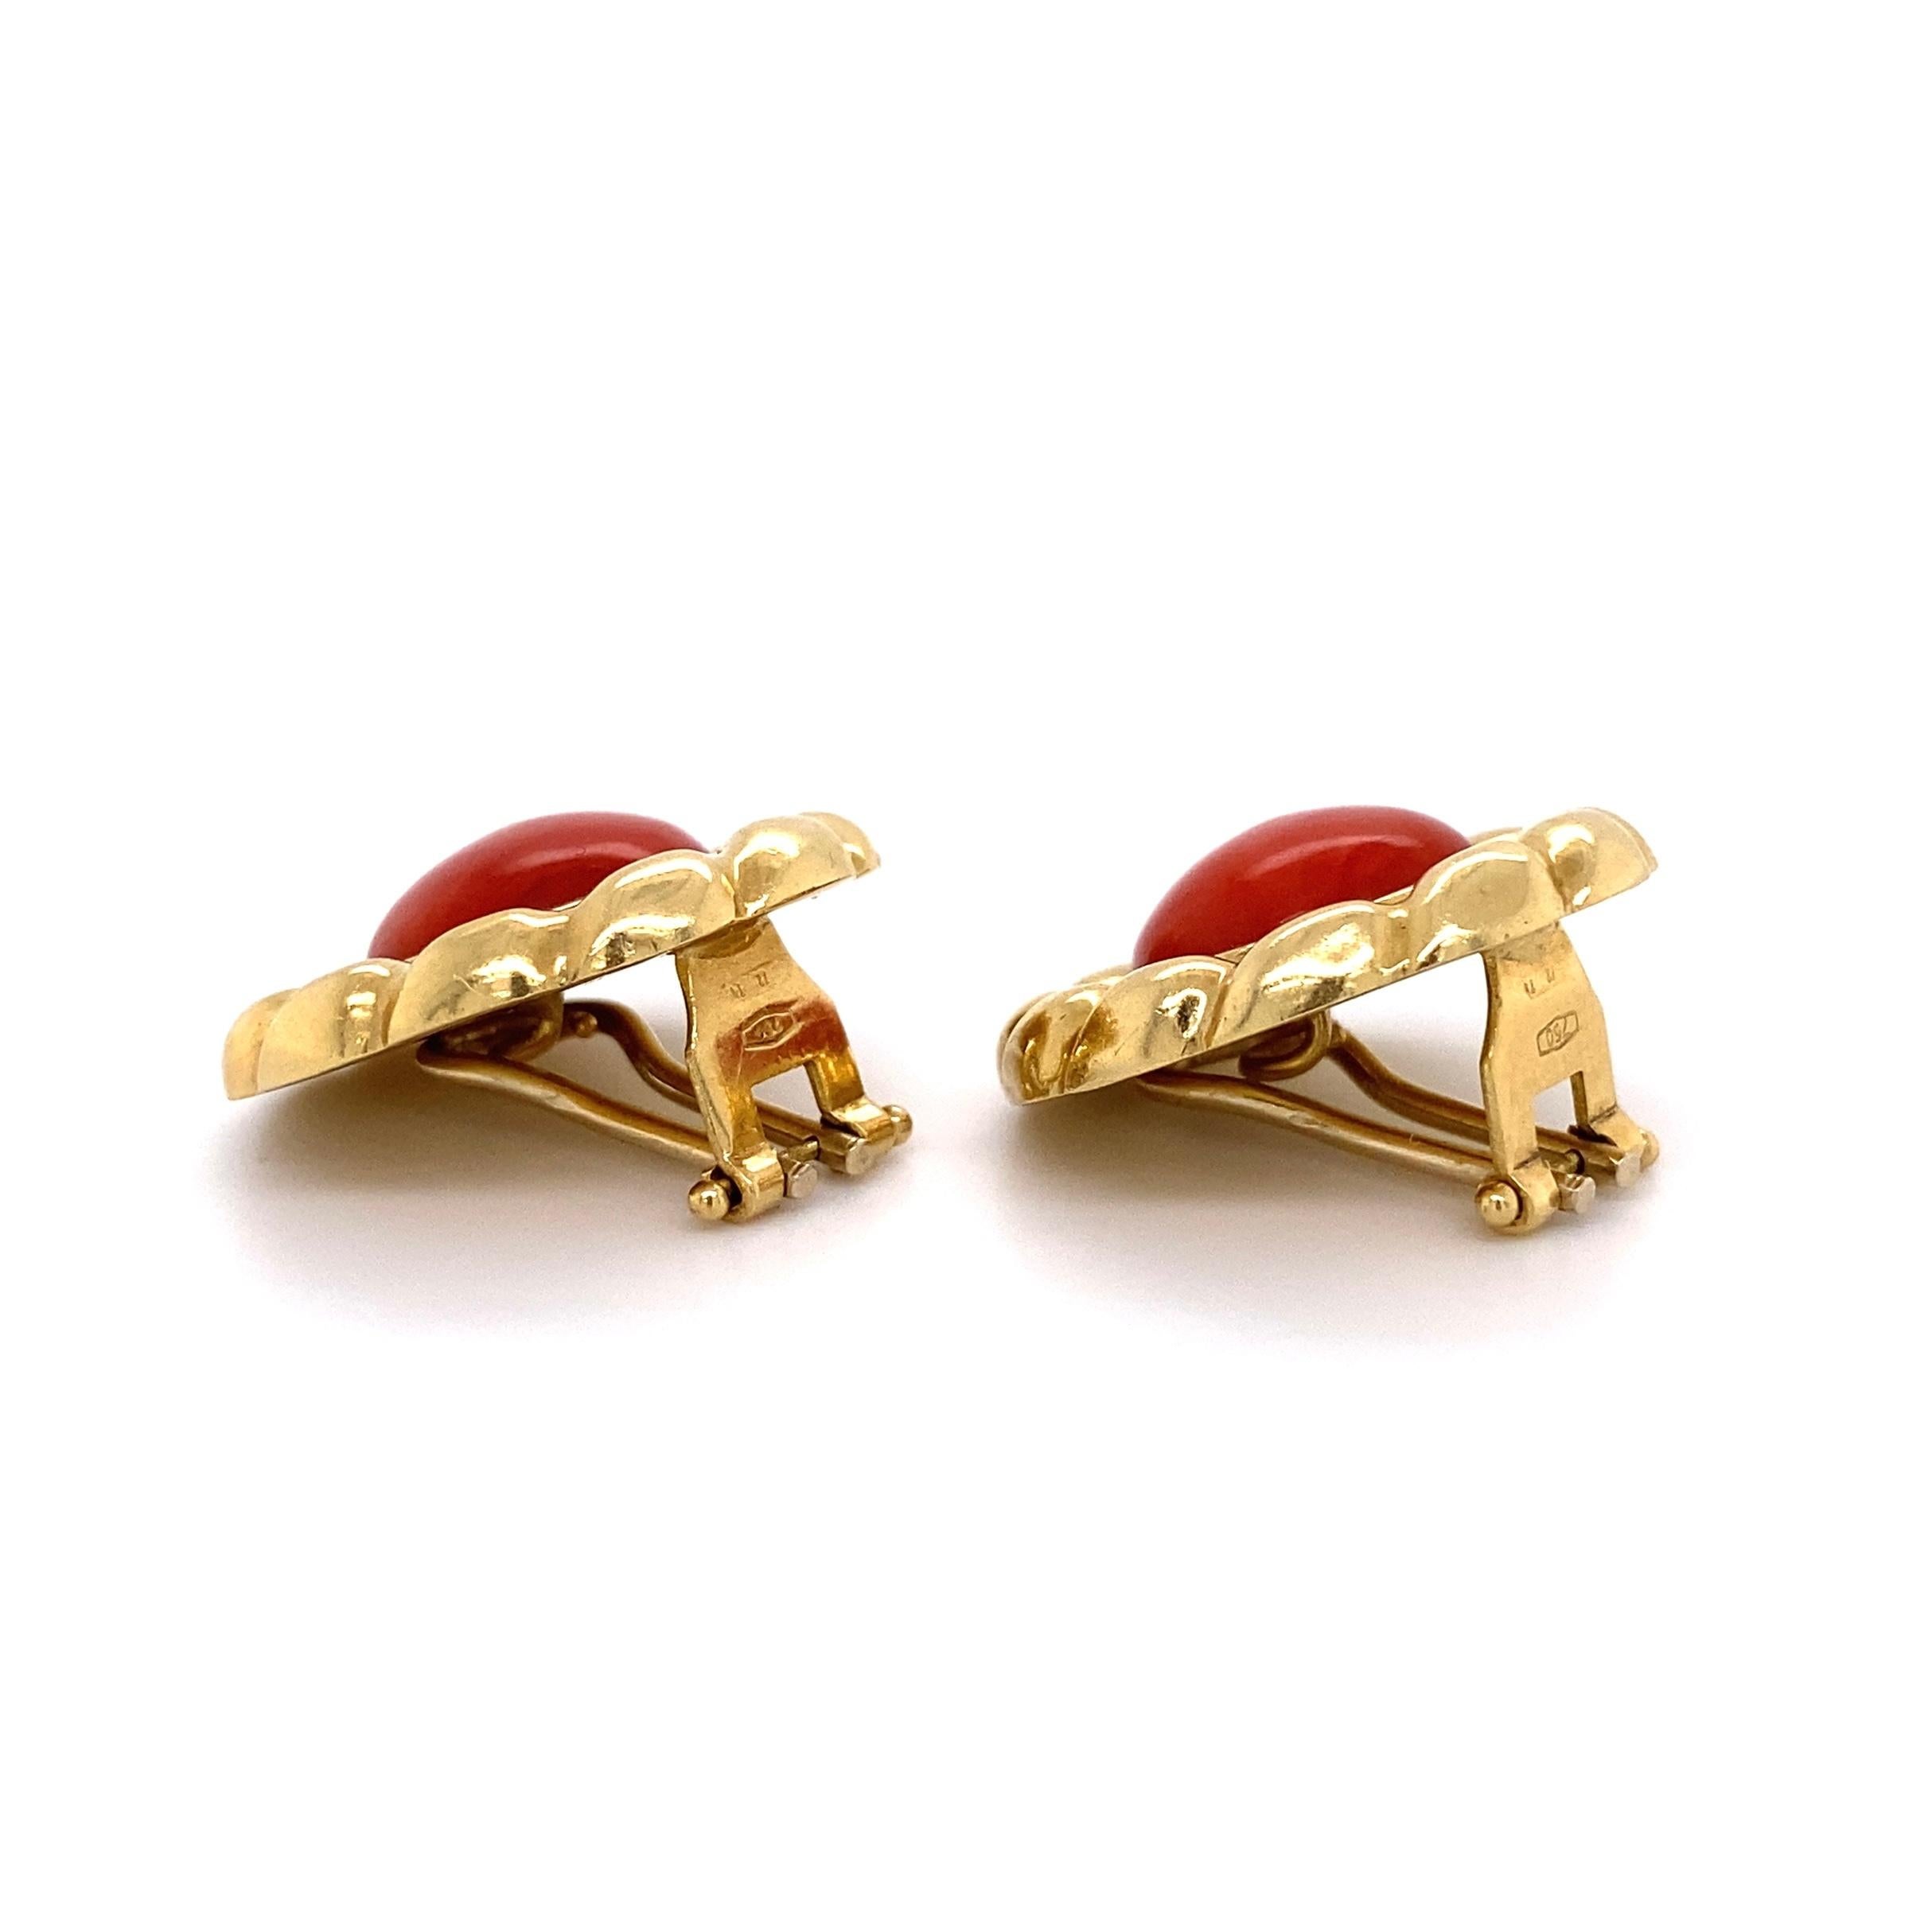 Simply Beautiful Pair of Red Coral Button Earrings. Centers securely Hand set with a round Cabochon Coral Gemstone. French Clip backs. Marked: 750 (European standard for 18 Karat Gold). Hand crafted in 18K yellow Gold. Approx. dimensions: 0.87